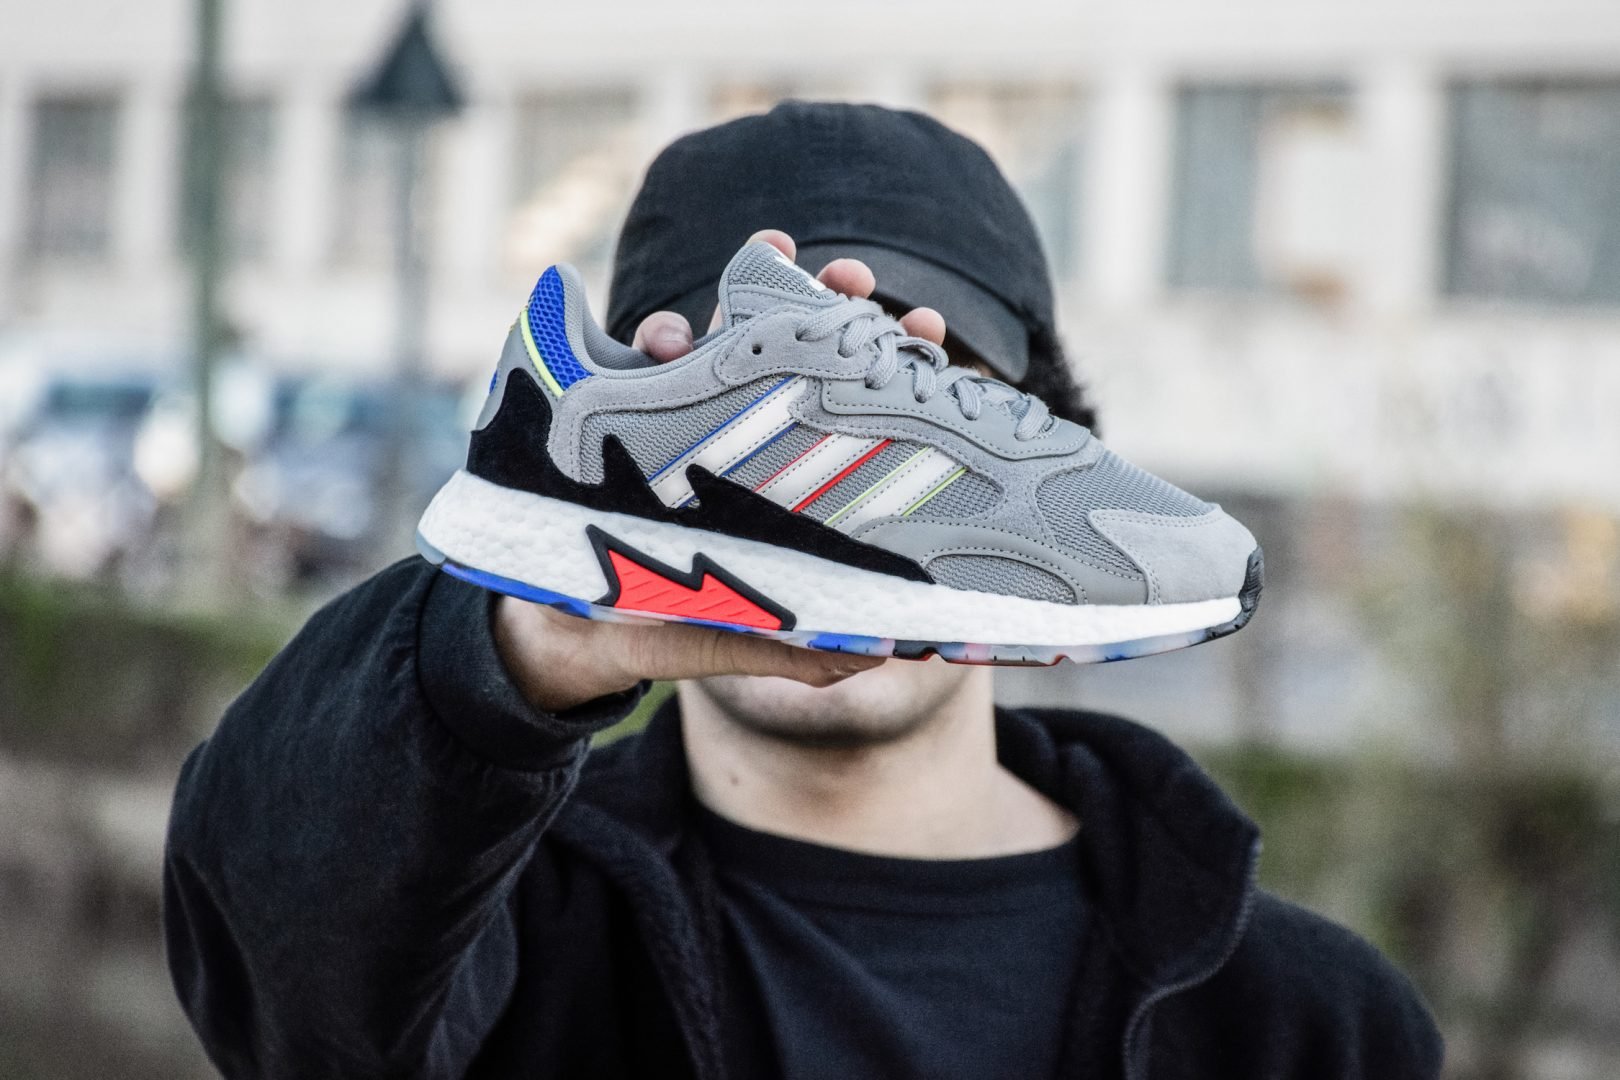 adidas Originals brings the 90s back to life with the TRESC RUN | COLLATER.AL1620 x 1080